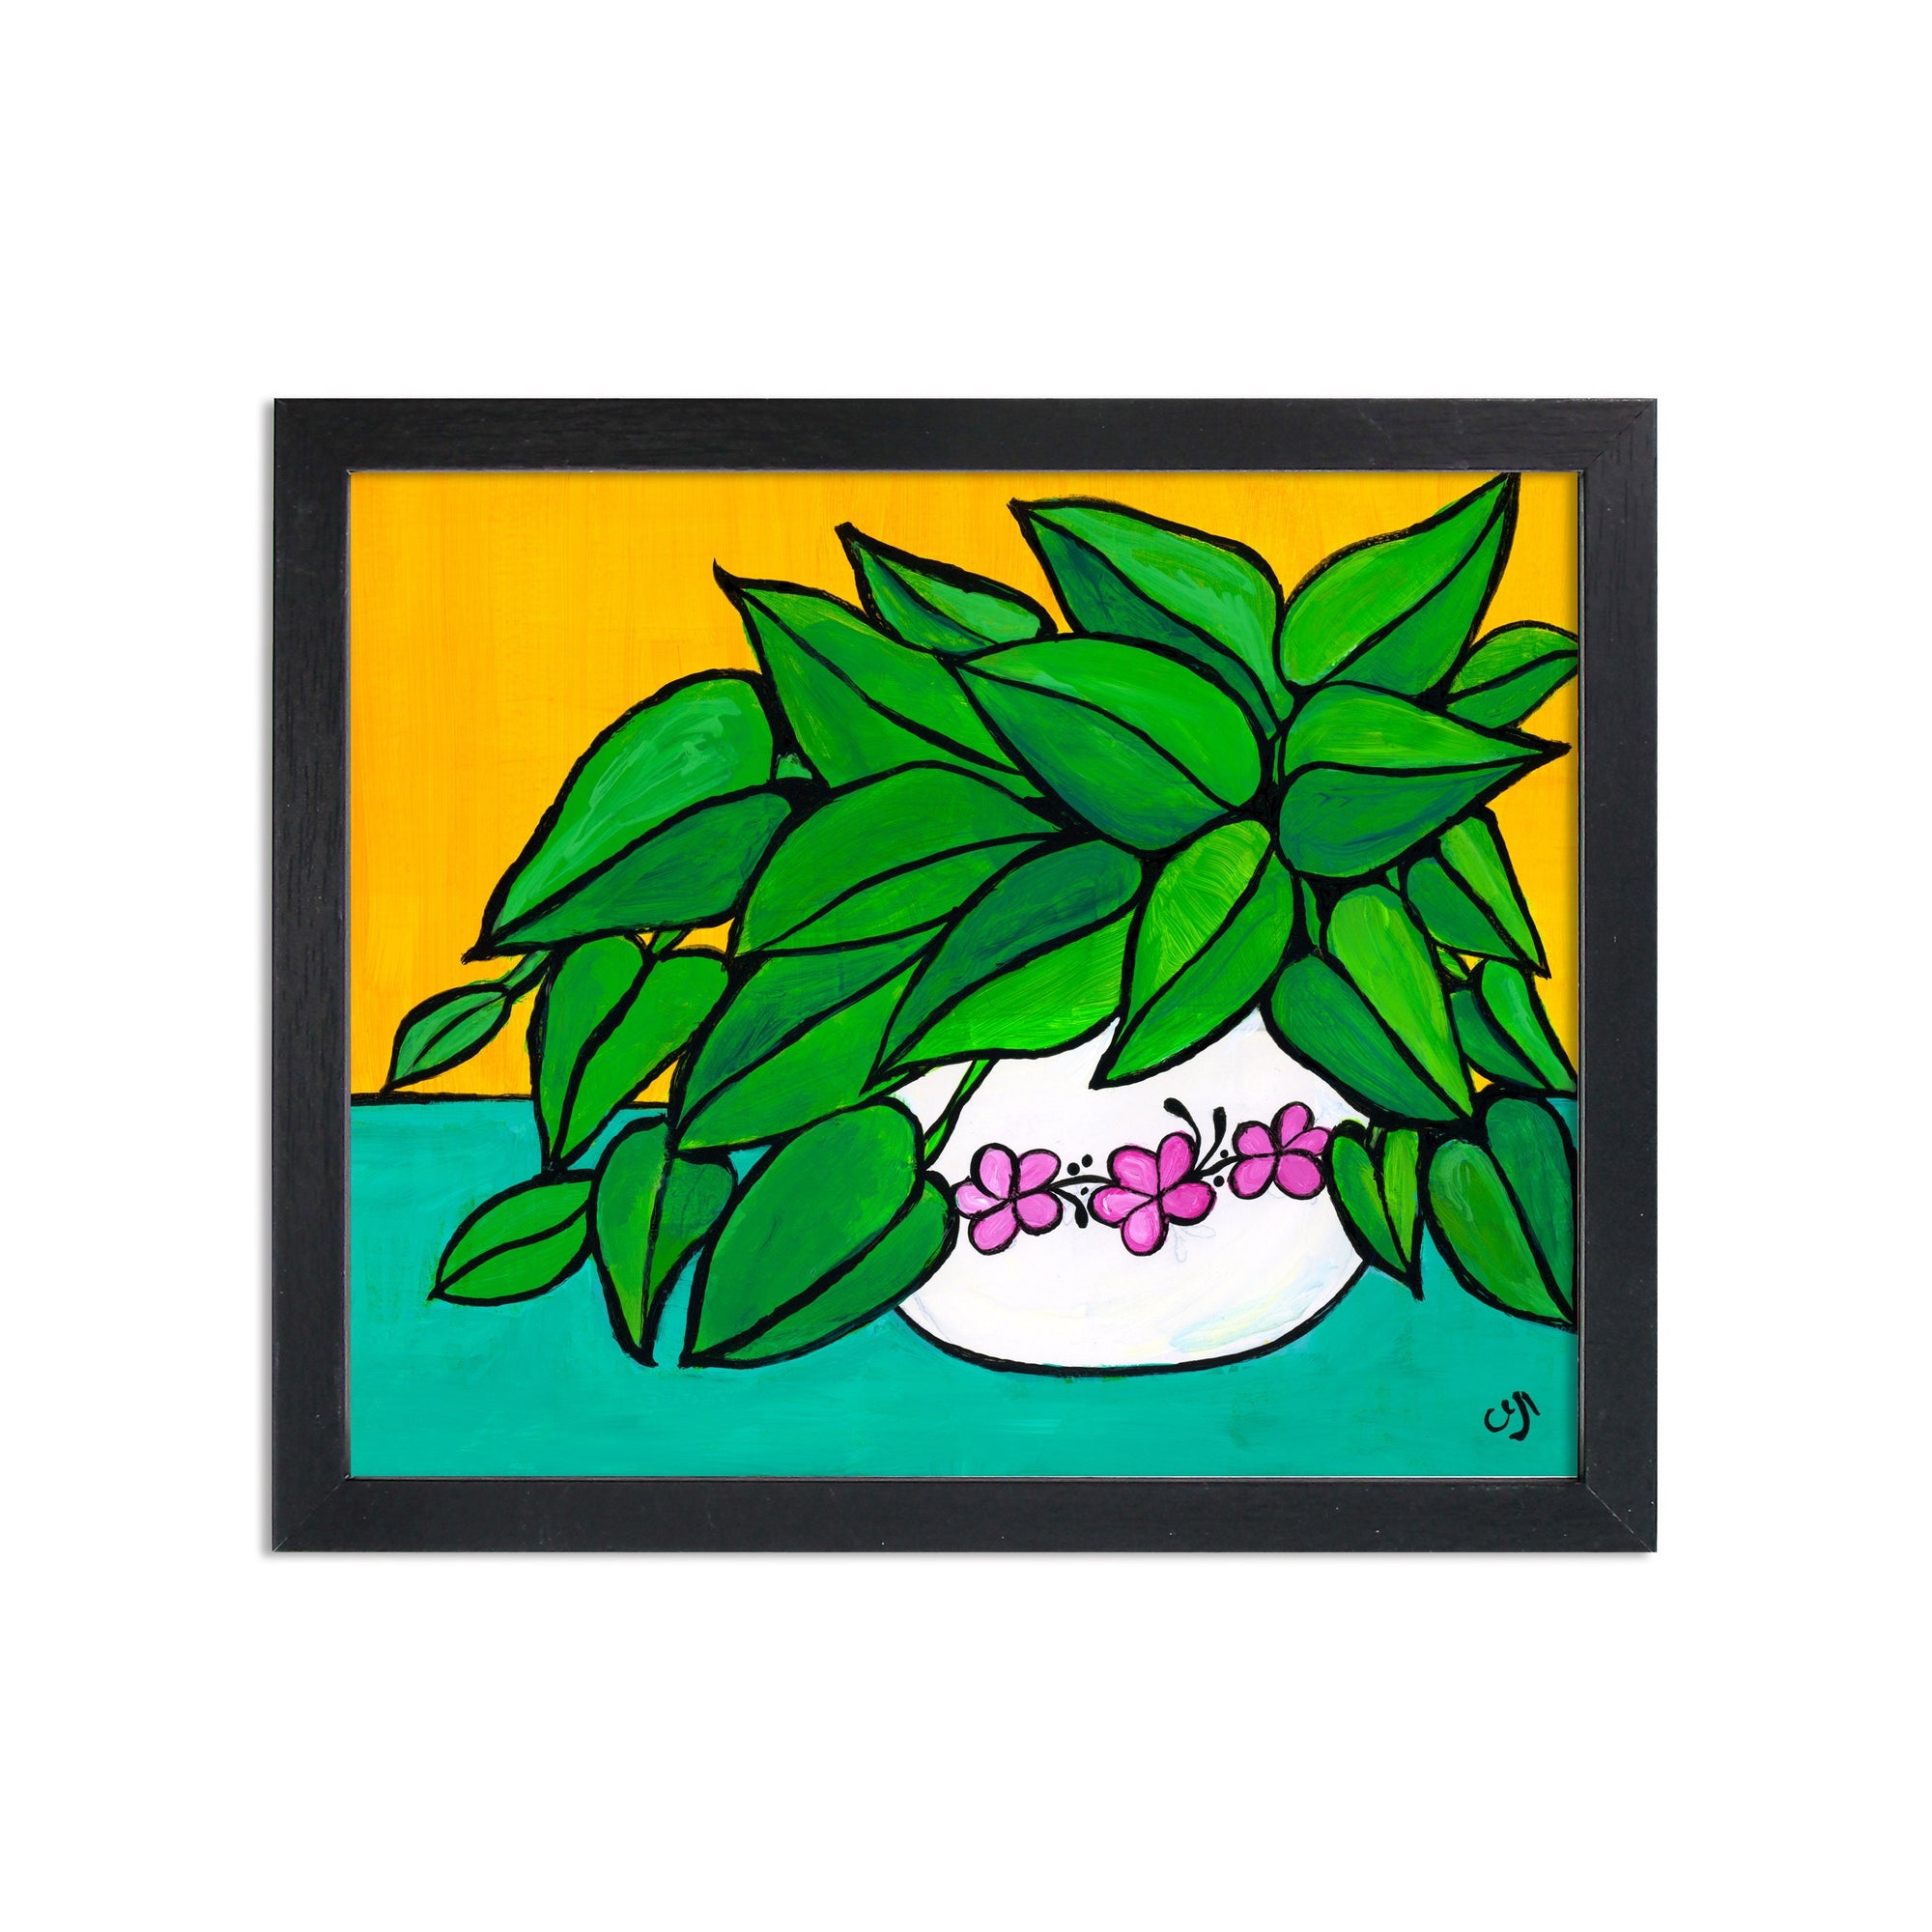 Happy Plant Print - Green Pothos Art Still Life Giclée - Green Leaves - Colorful Home Wall Art Decor by Claudine Intner